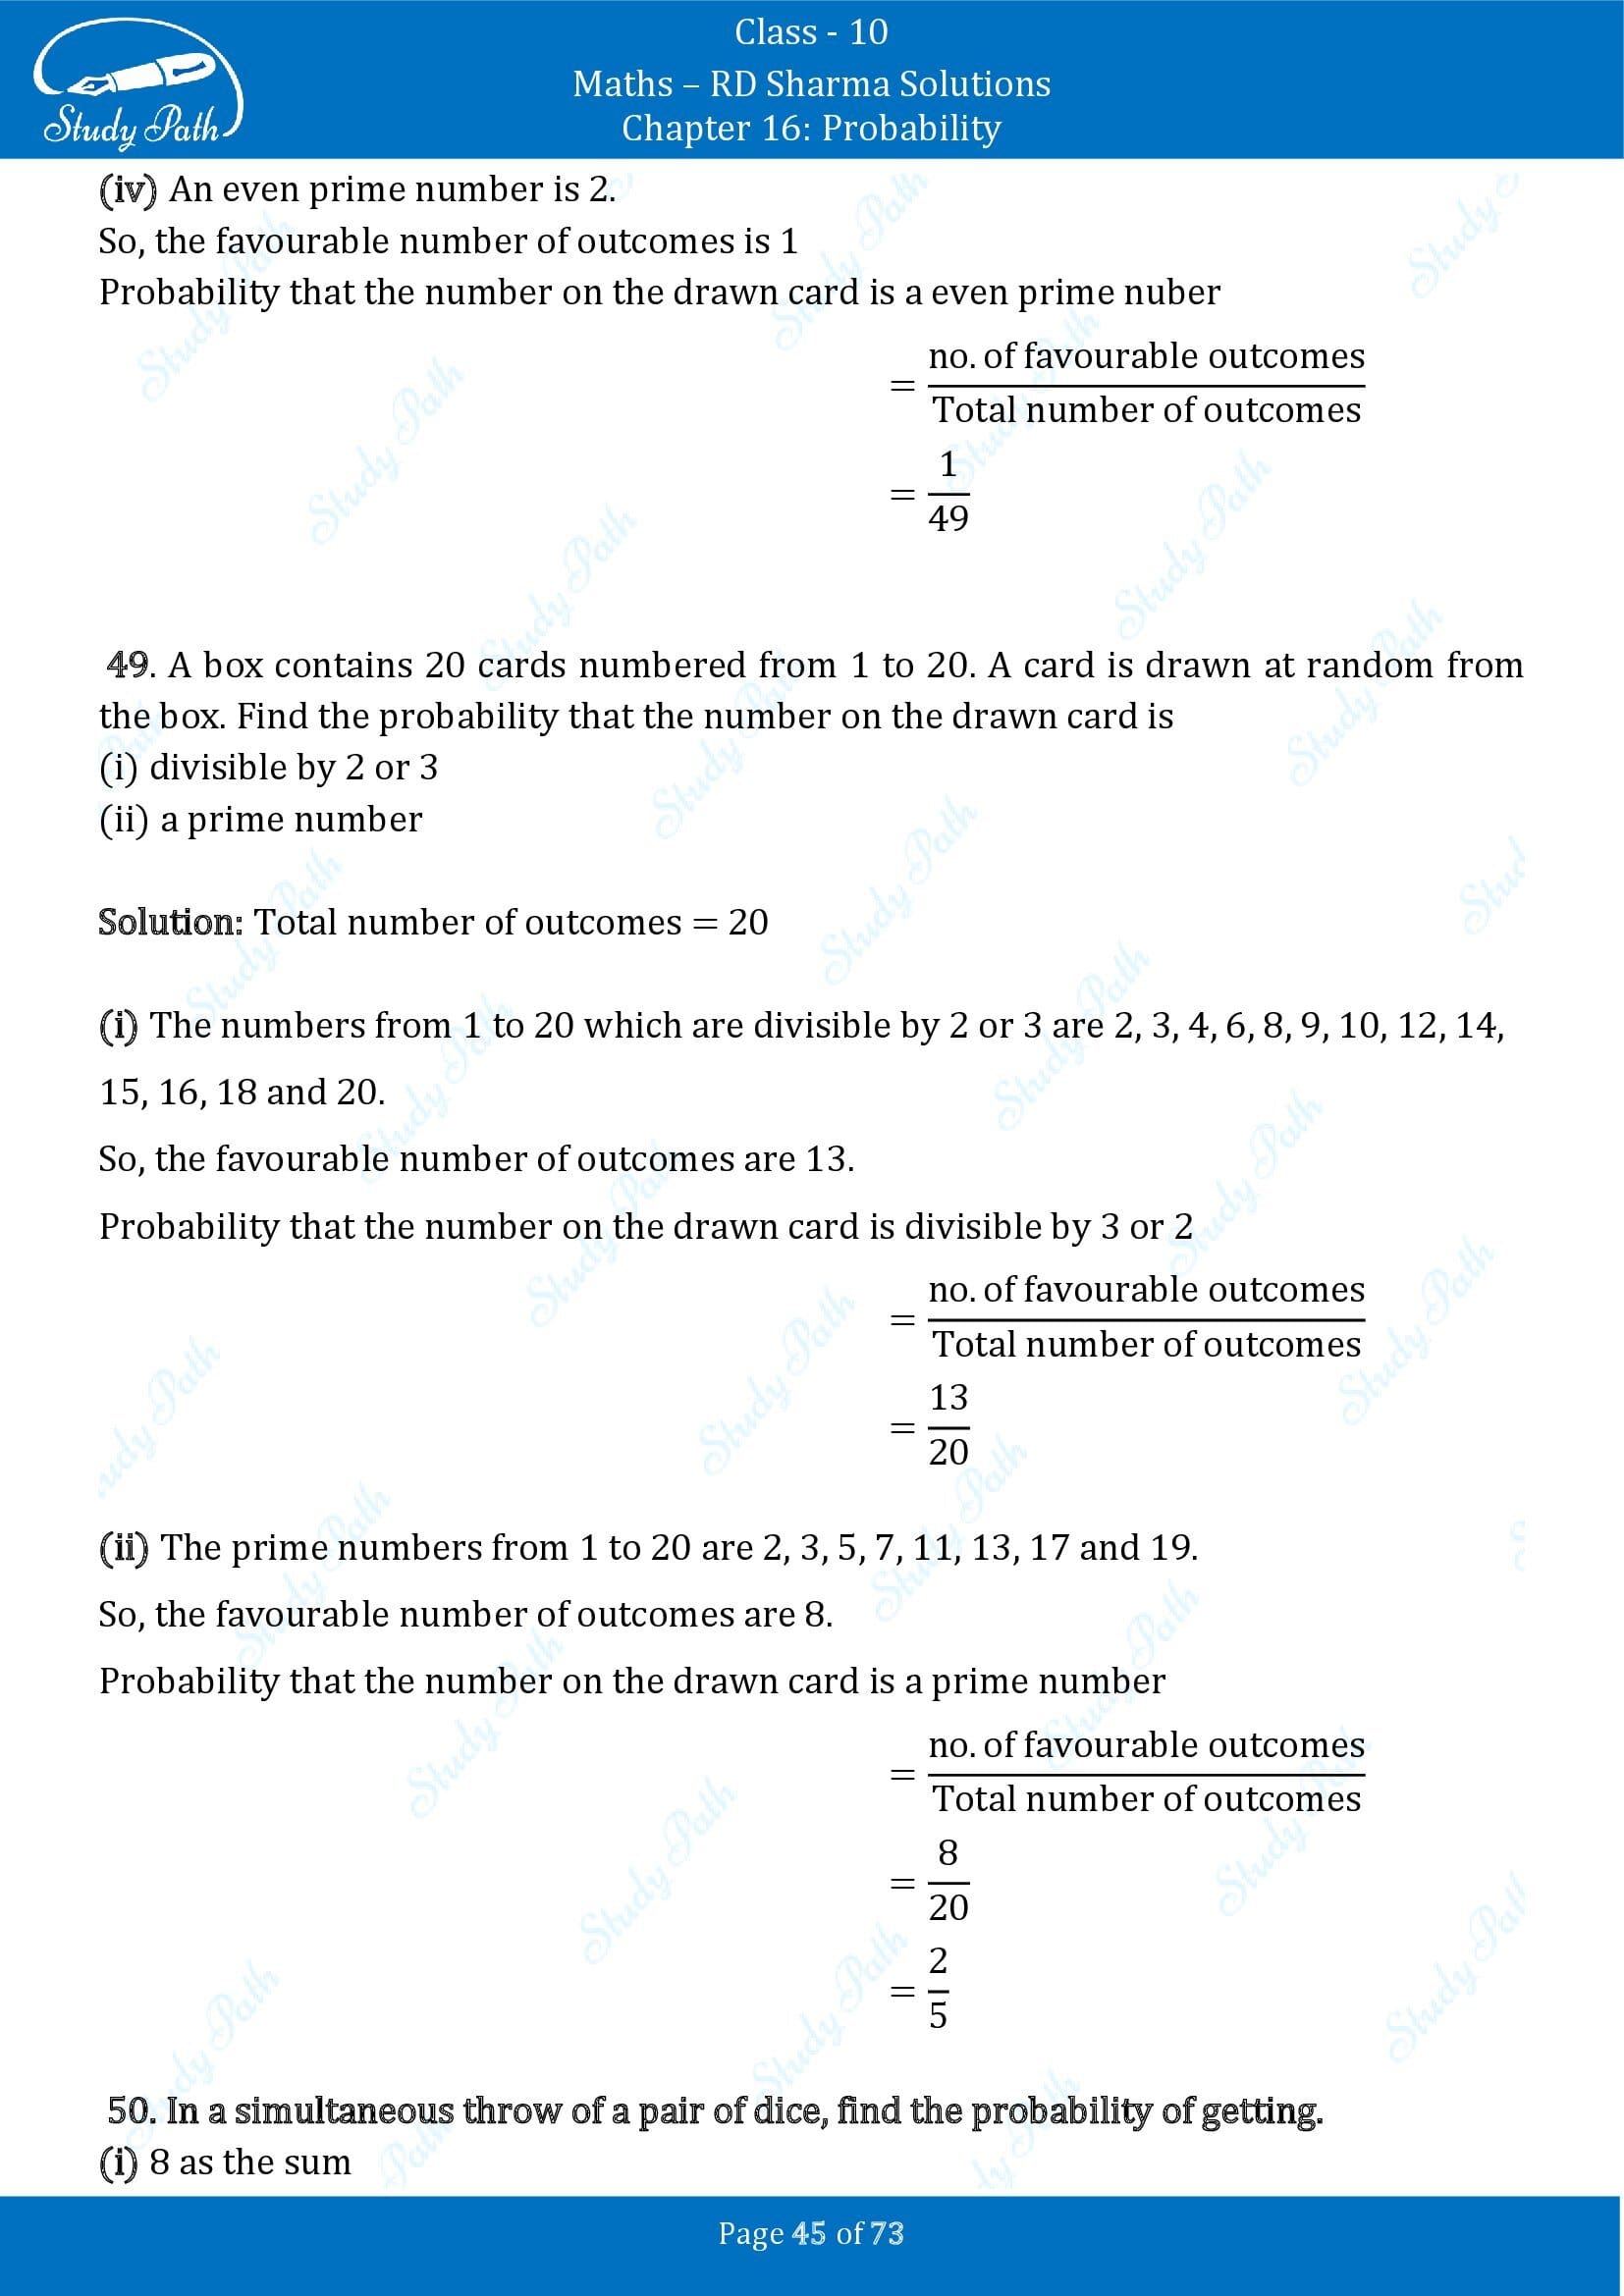 RD Sharma Solutions Class 10 Chapter 16 Probability Exercise 16.1 00045